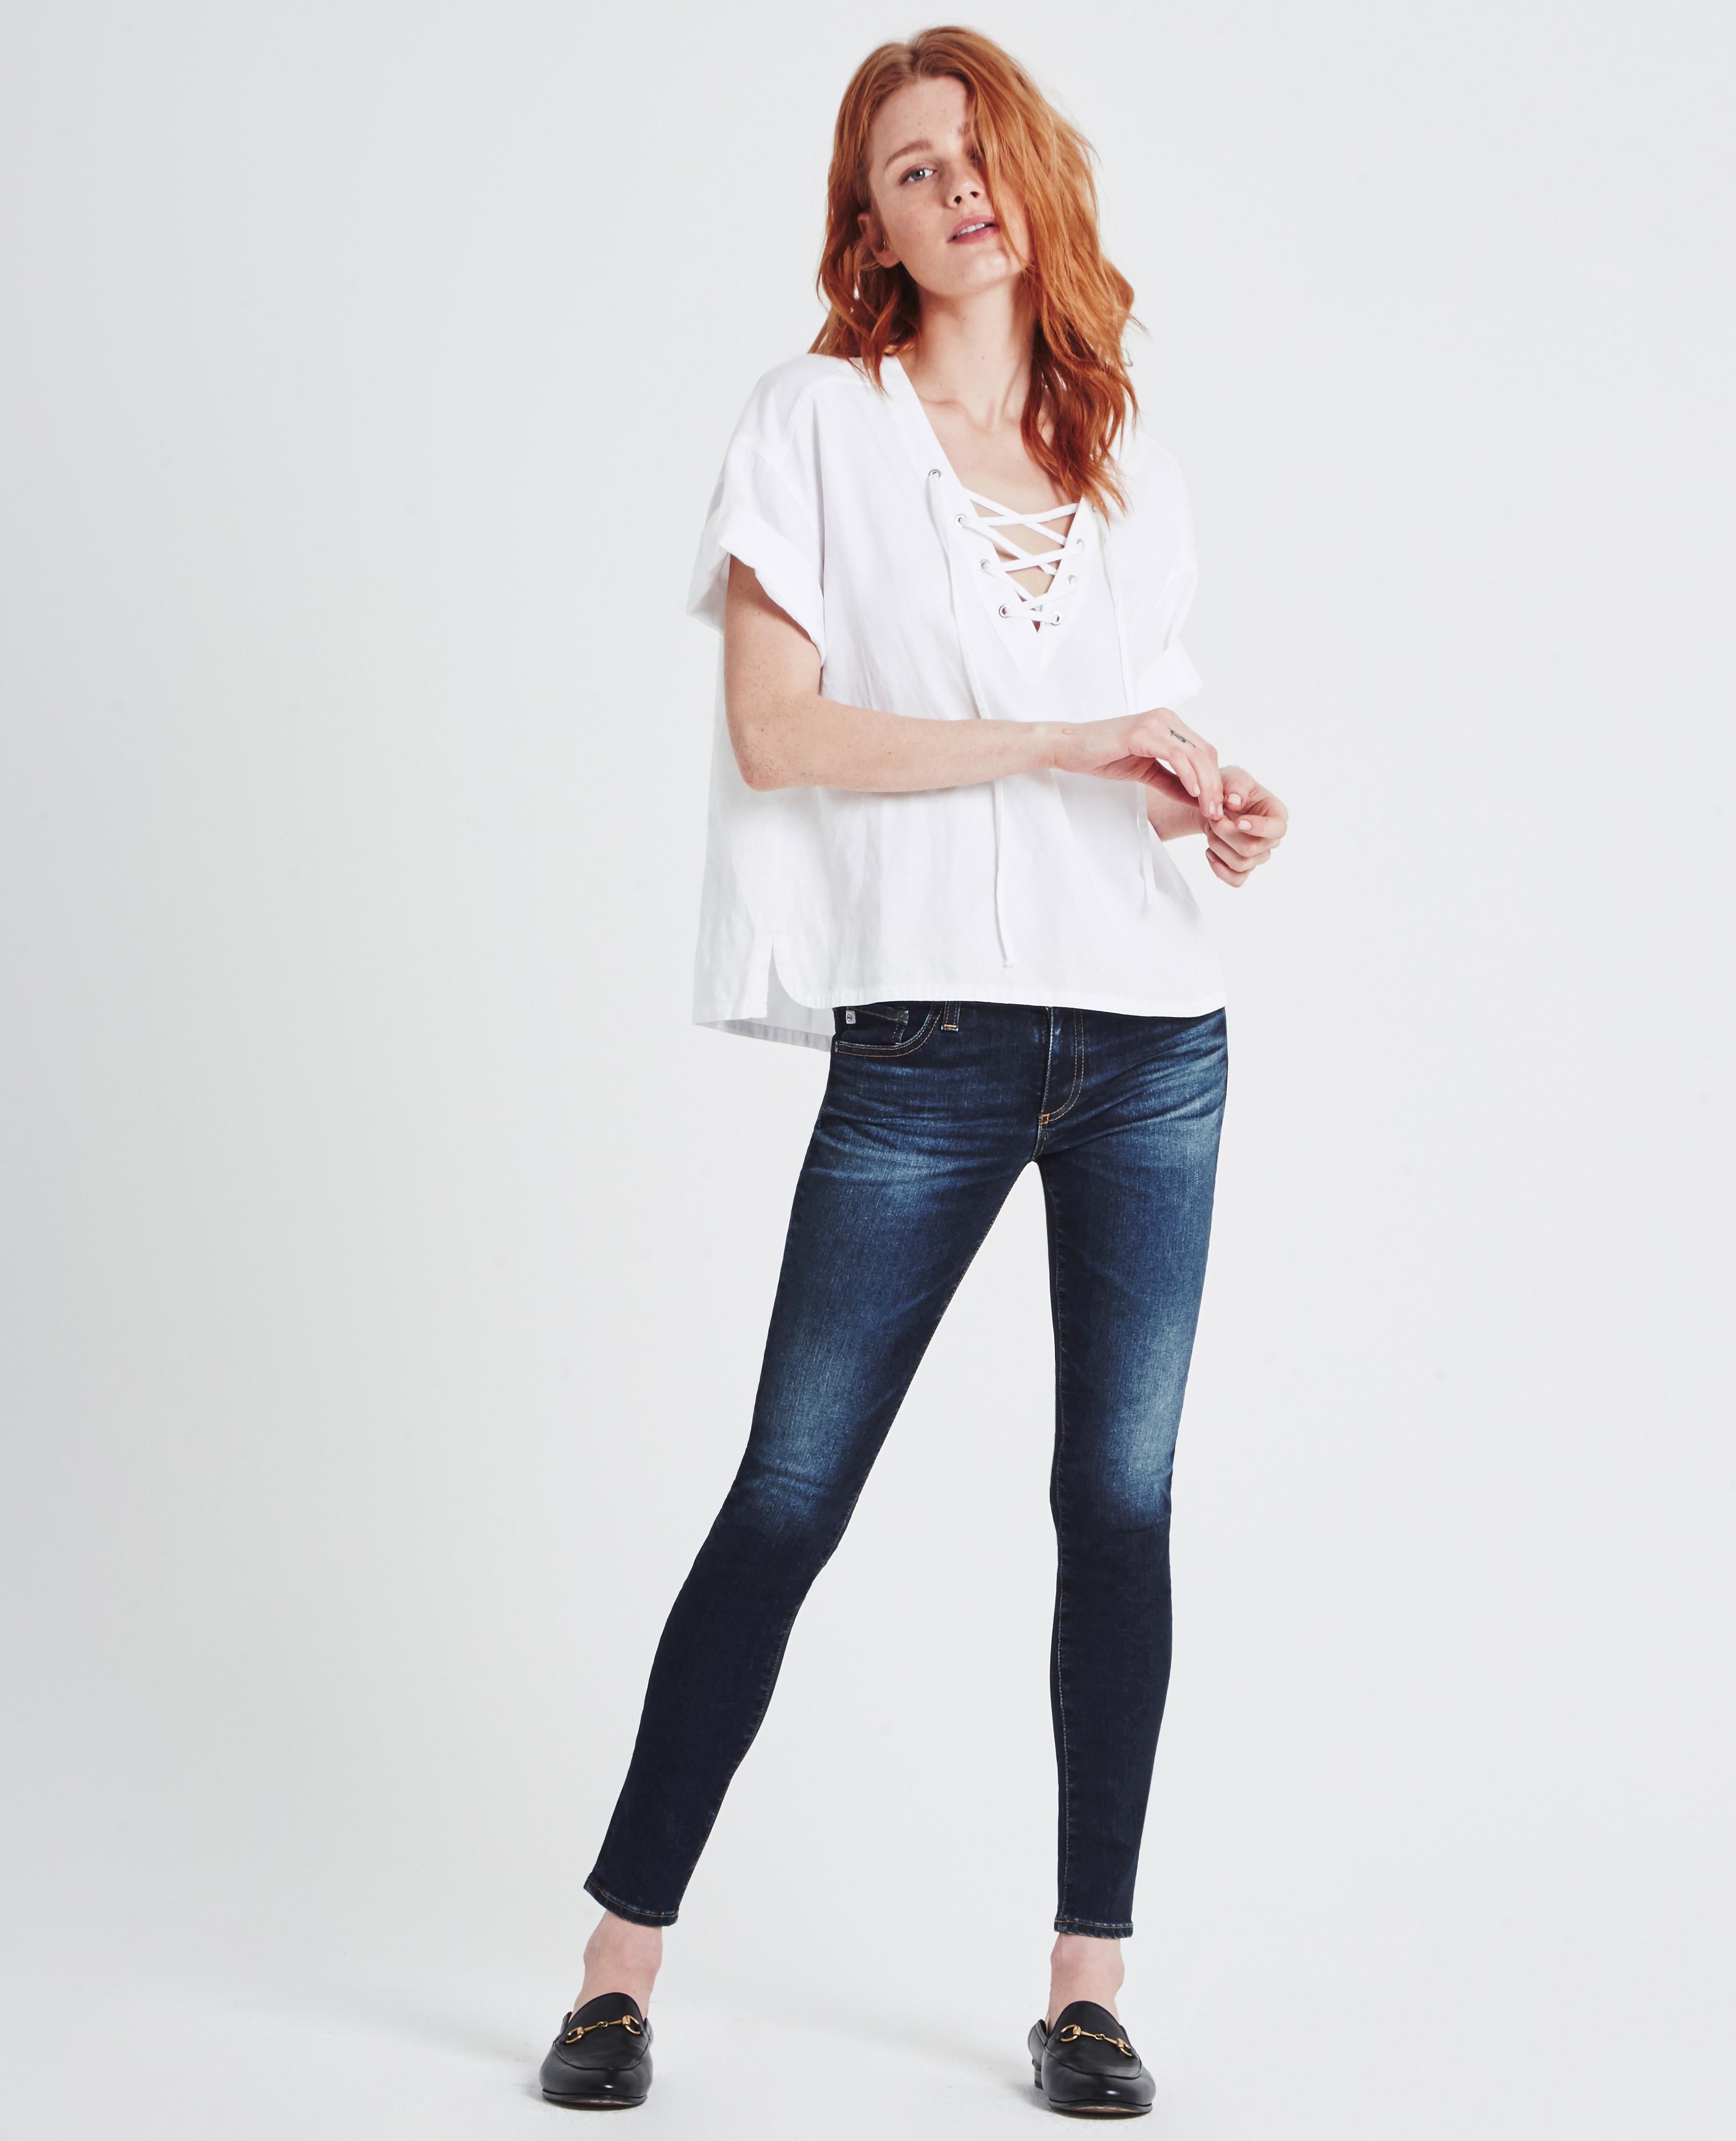 The Legging Ankle Jeans